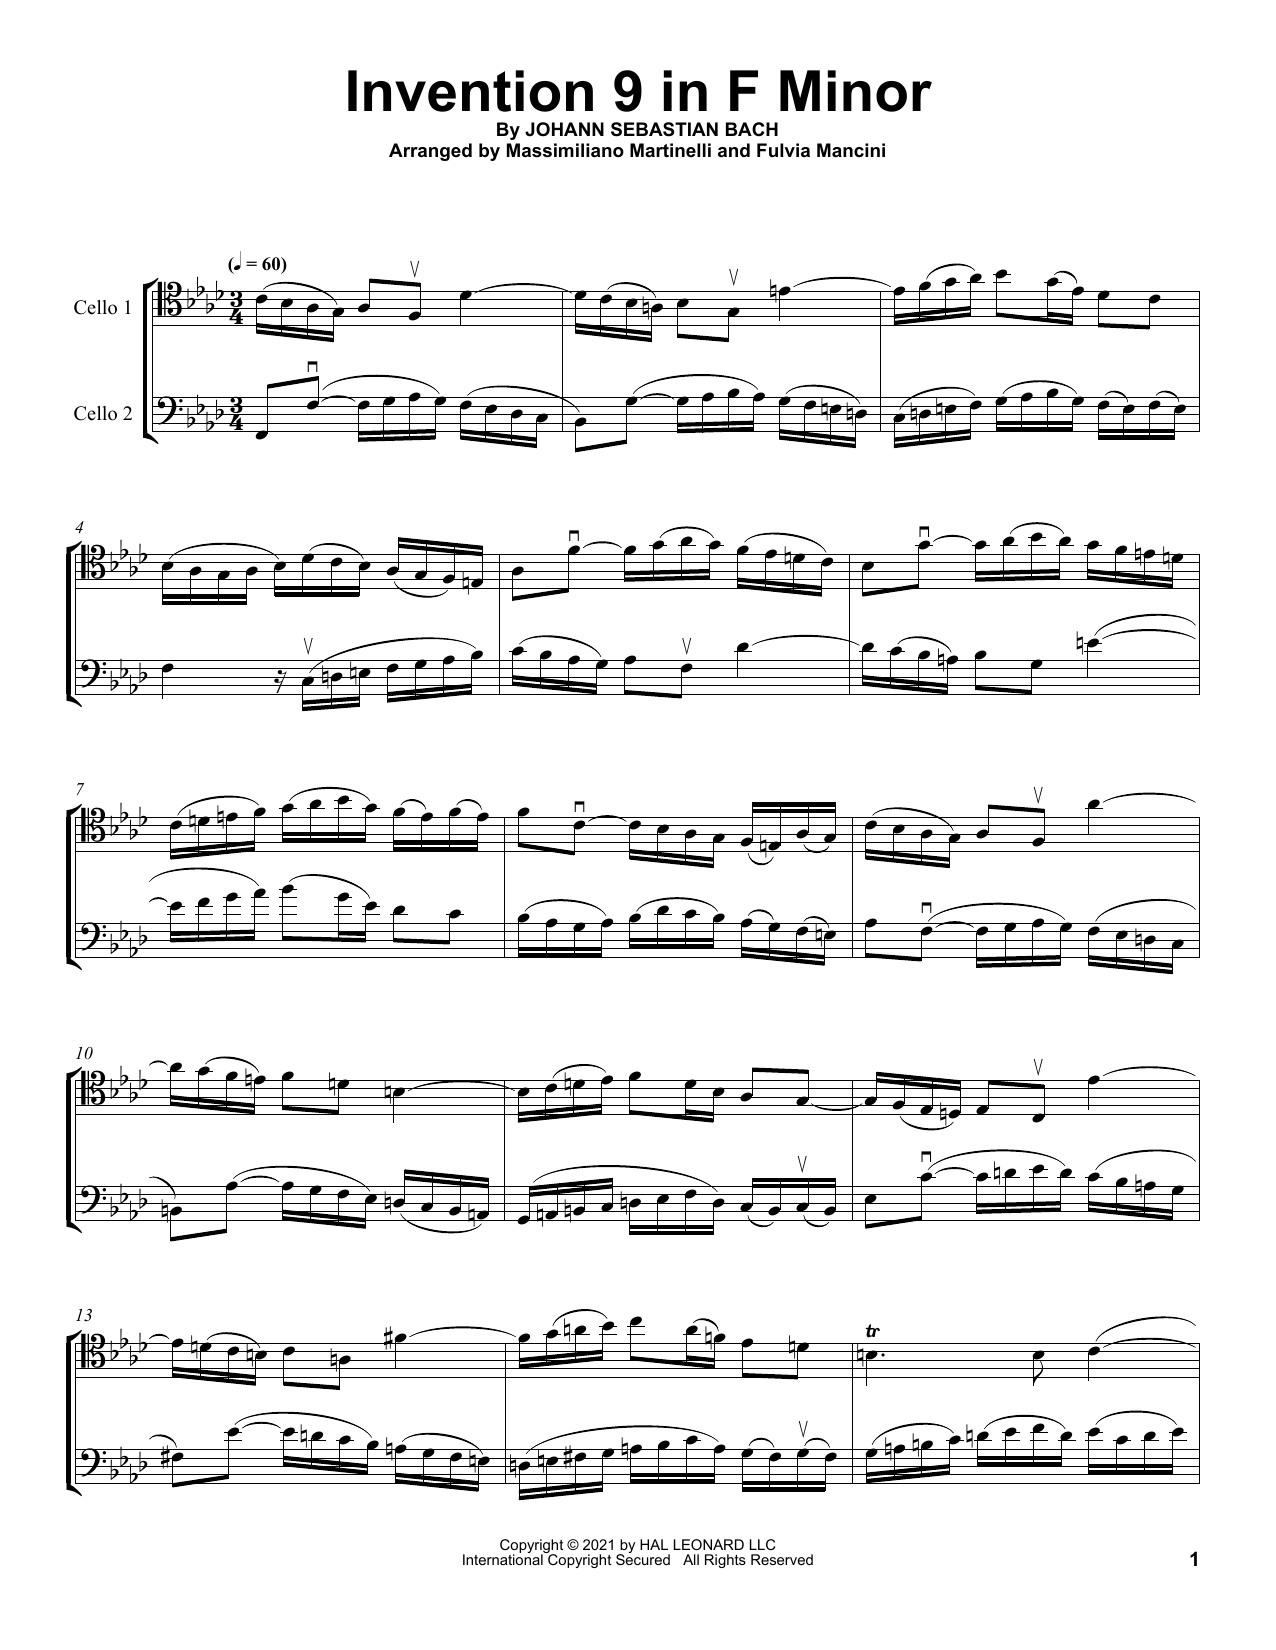 Download Mr & Mrs Cello Invention 9 In F Minor Sheet Music